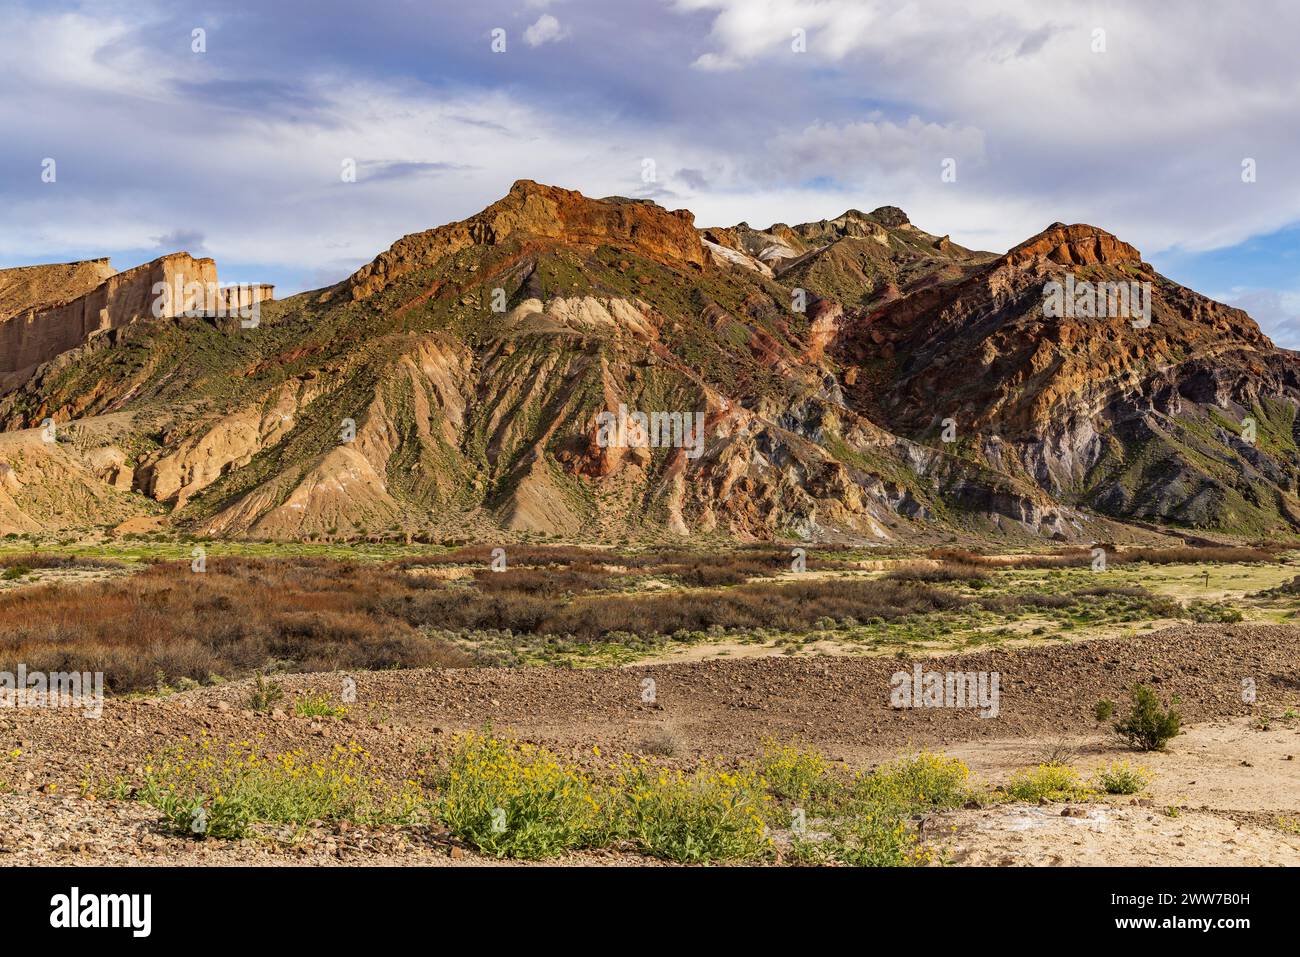 This is a view of  a multi-colored Mountain seen looking south along the China Ranch Trail near Tecopa, Inyo County, California, USA. Stock Photo